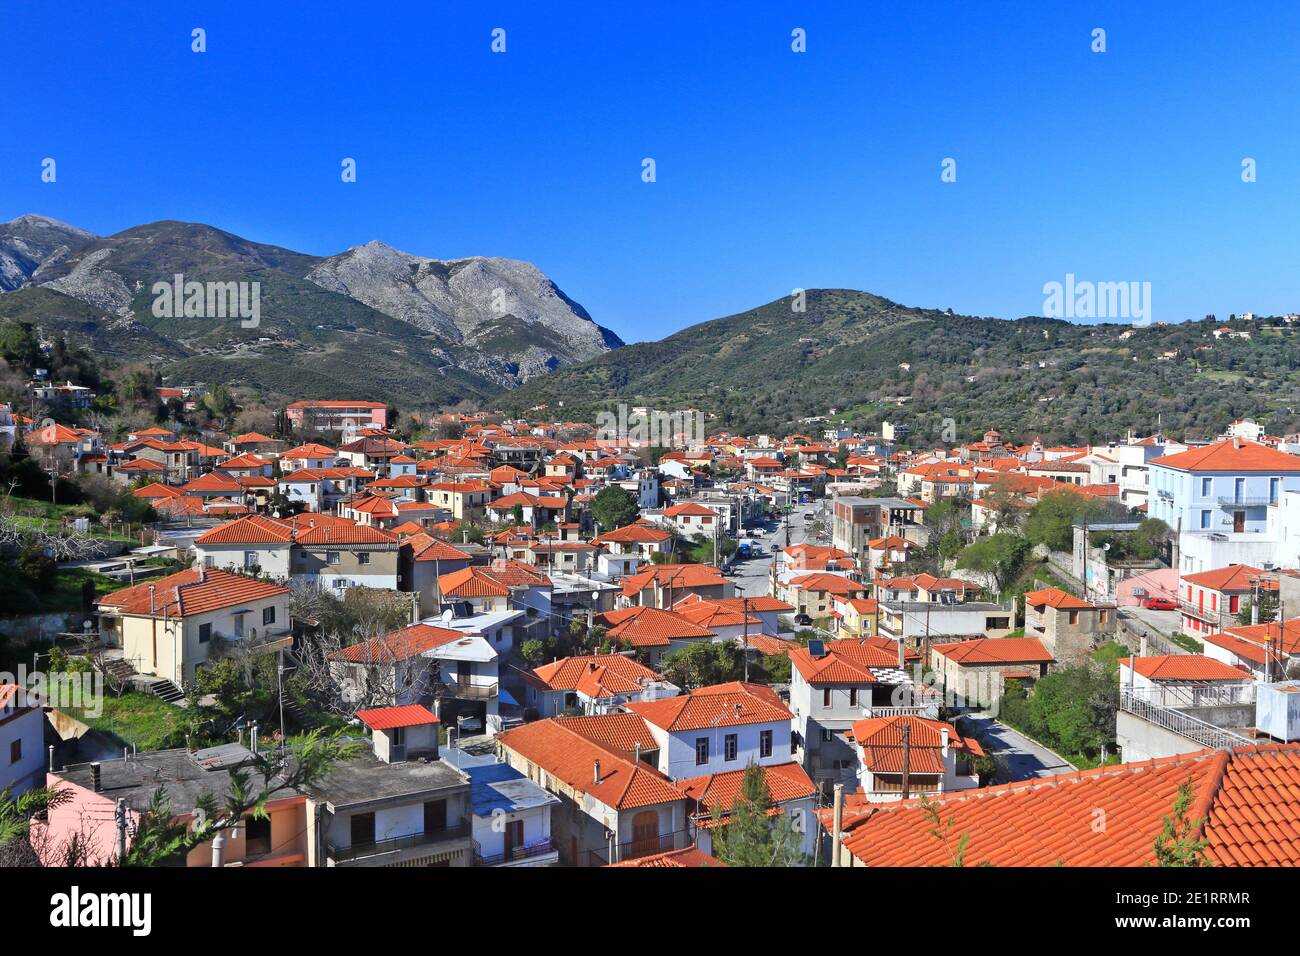 Kymi town, a picturesque and historic town in the island of Euboea, the second largest island of Greece (after Crete), in Central Greece, Europe. Stock Photo